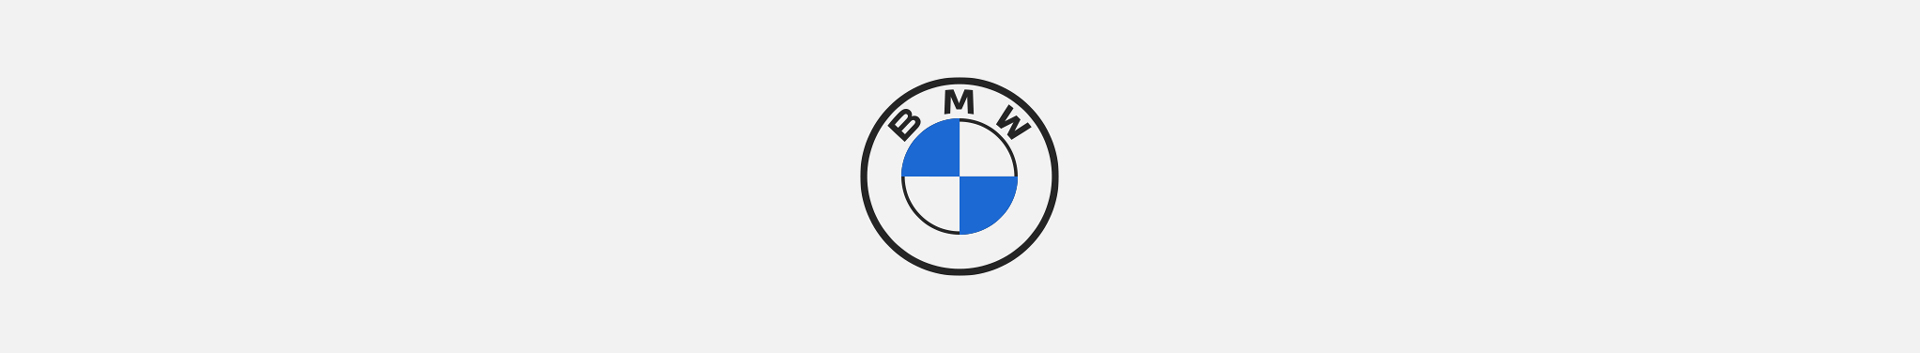 BMW roundel logo in black and blue on top of a BMW-lite-grey background.